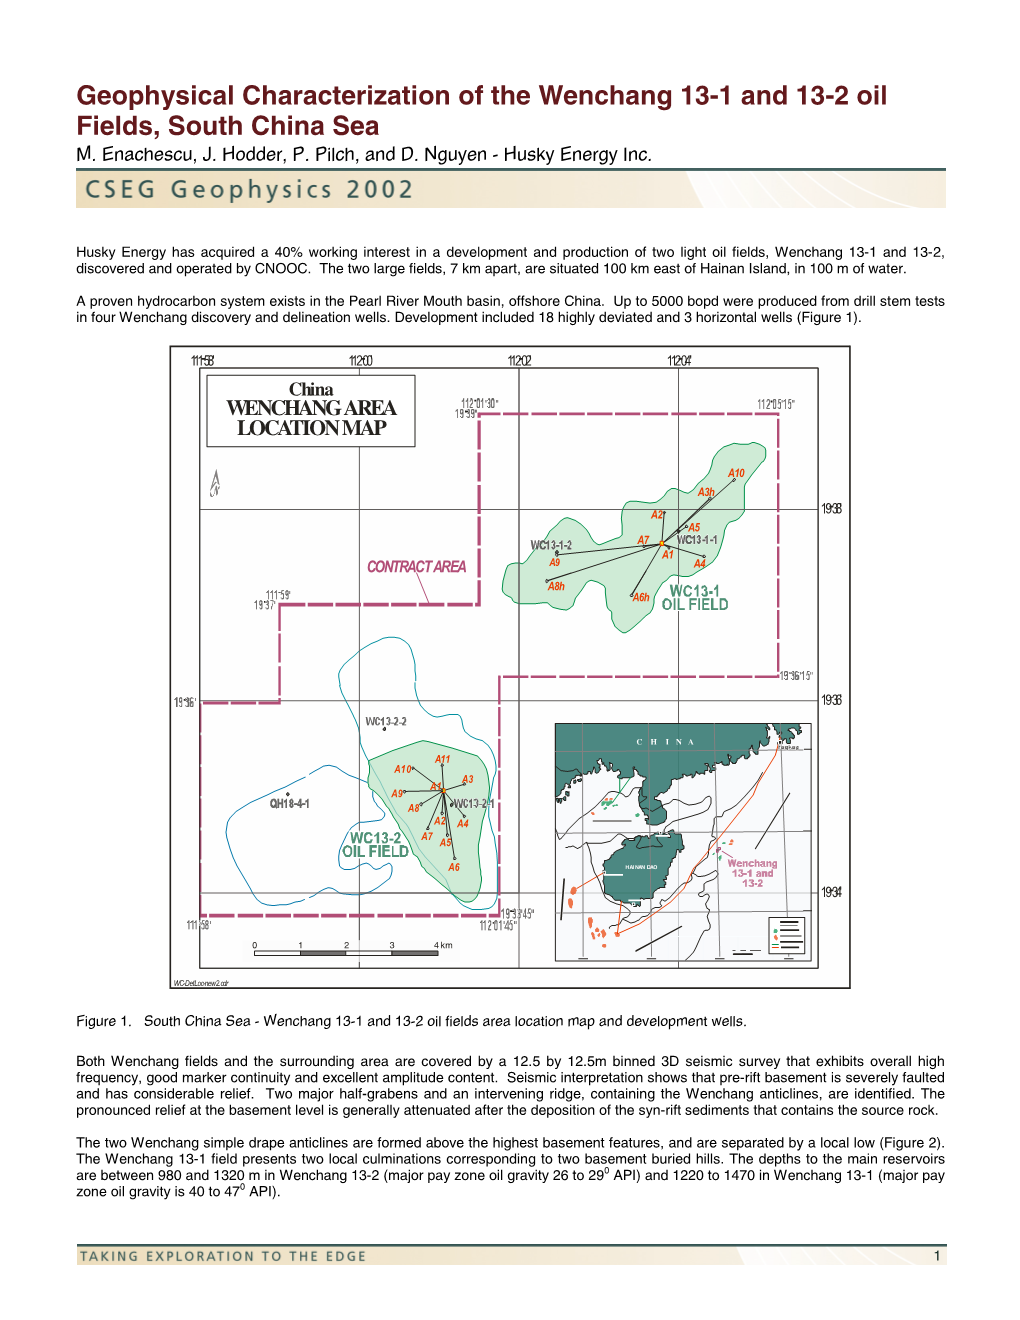 Geophysical Characterization of the Wenchang 13-1 and 13-2 Oil Fields, South China Sea M